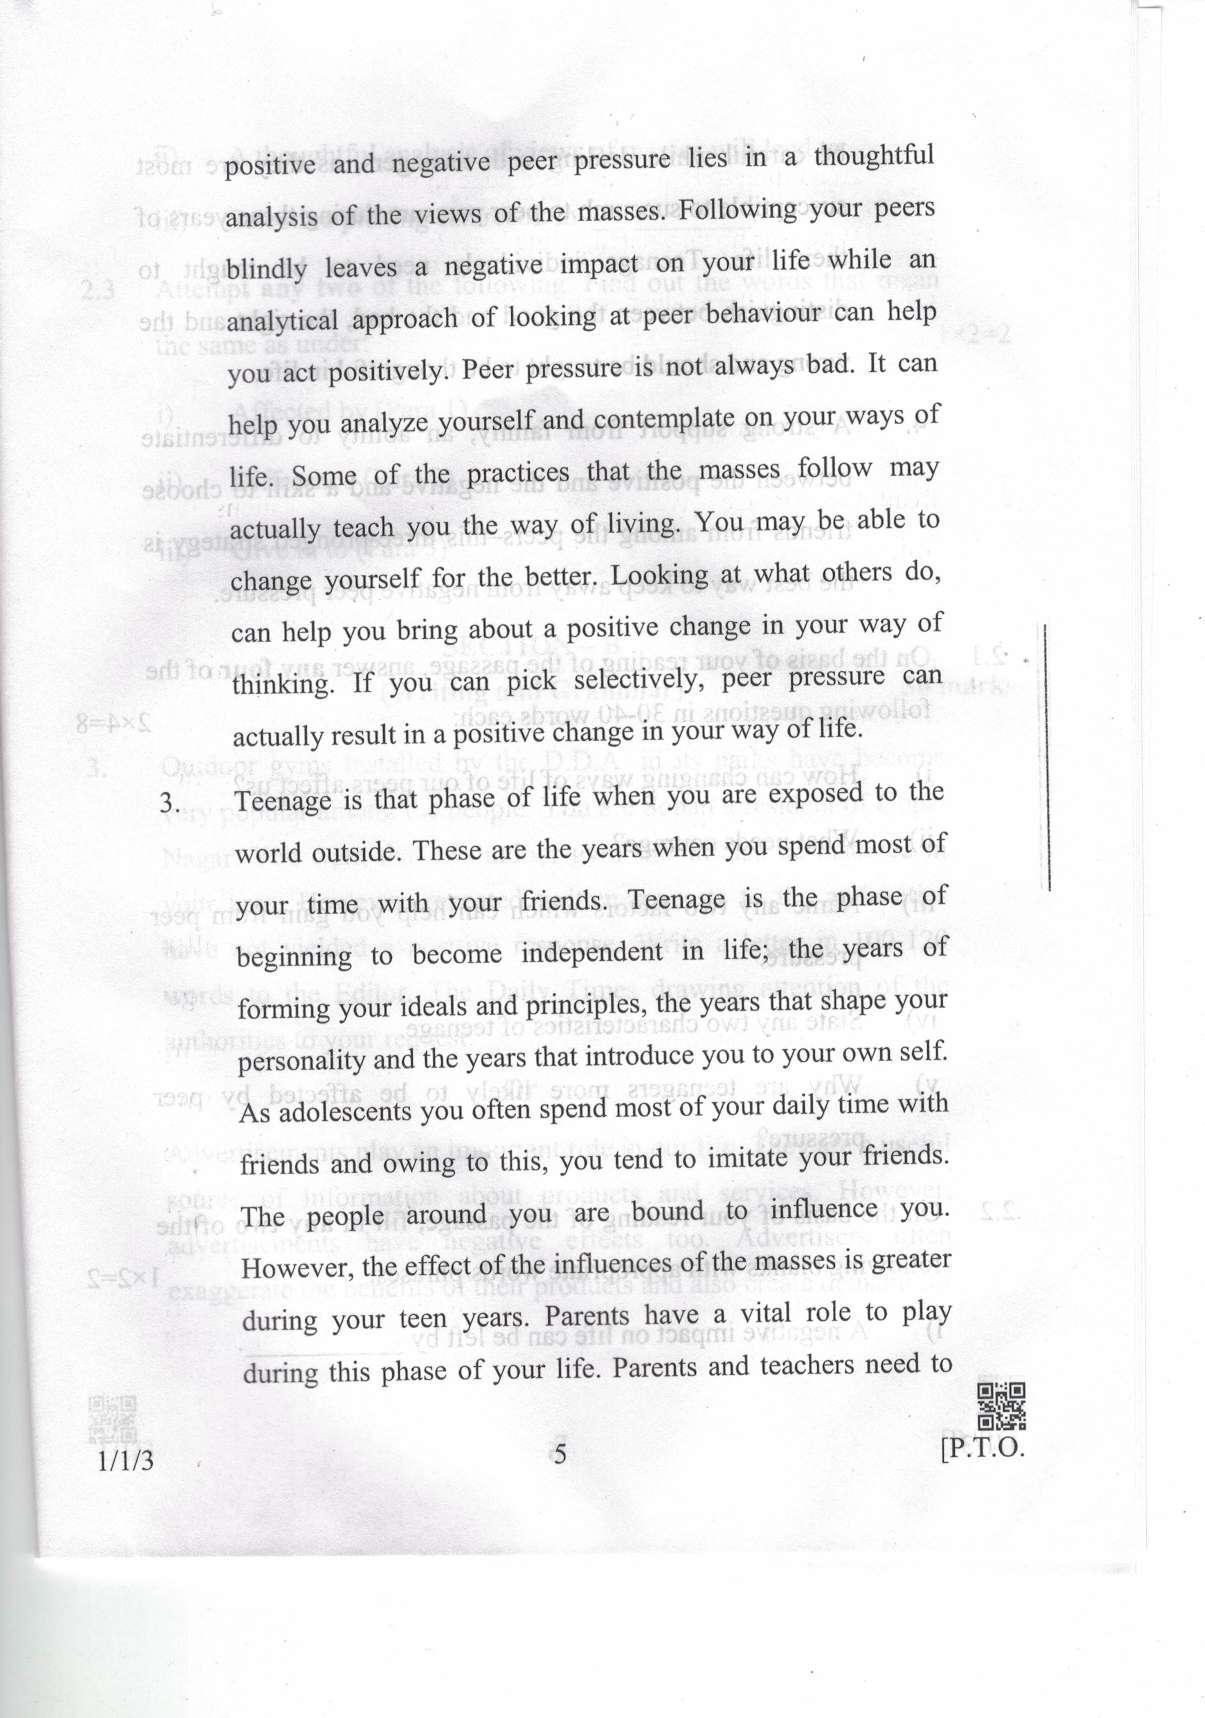 CBSE Class 10 1-1-3 Eng. Comm. 2019 Question Paper - Page 5